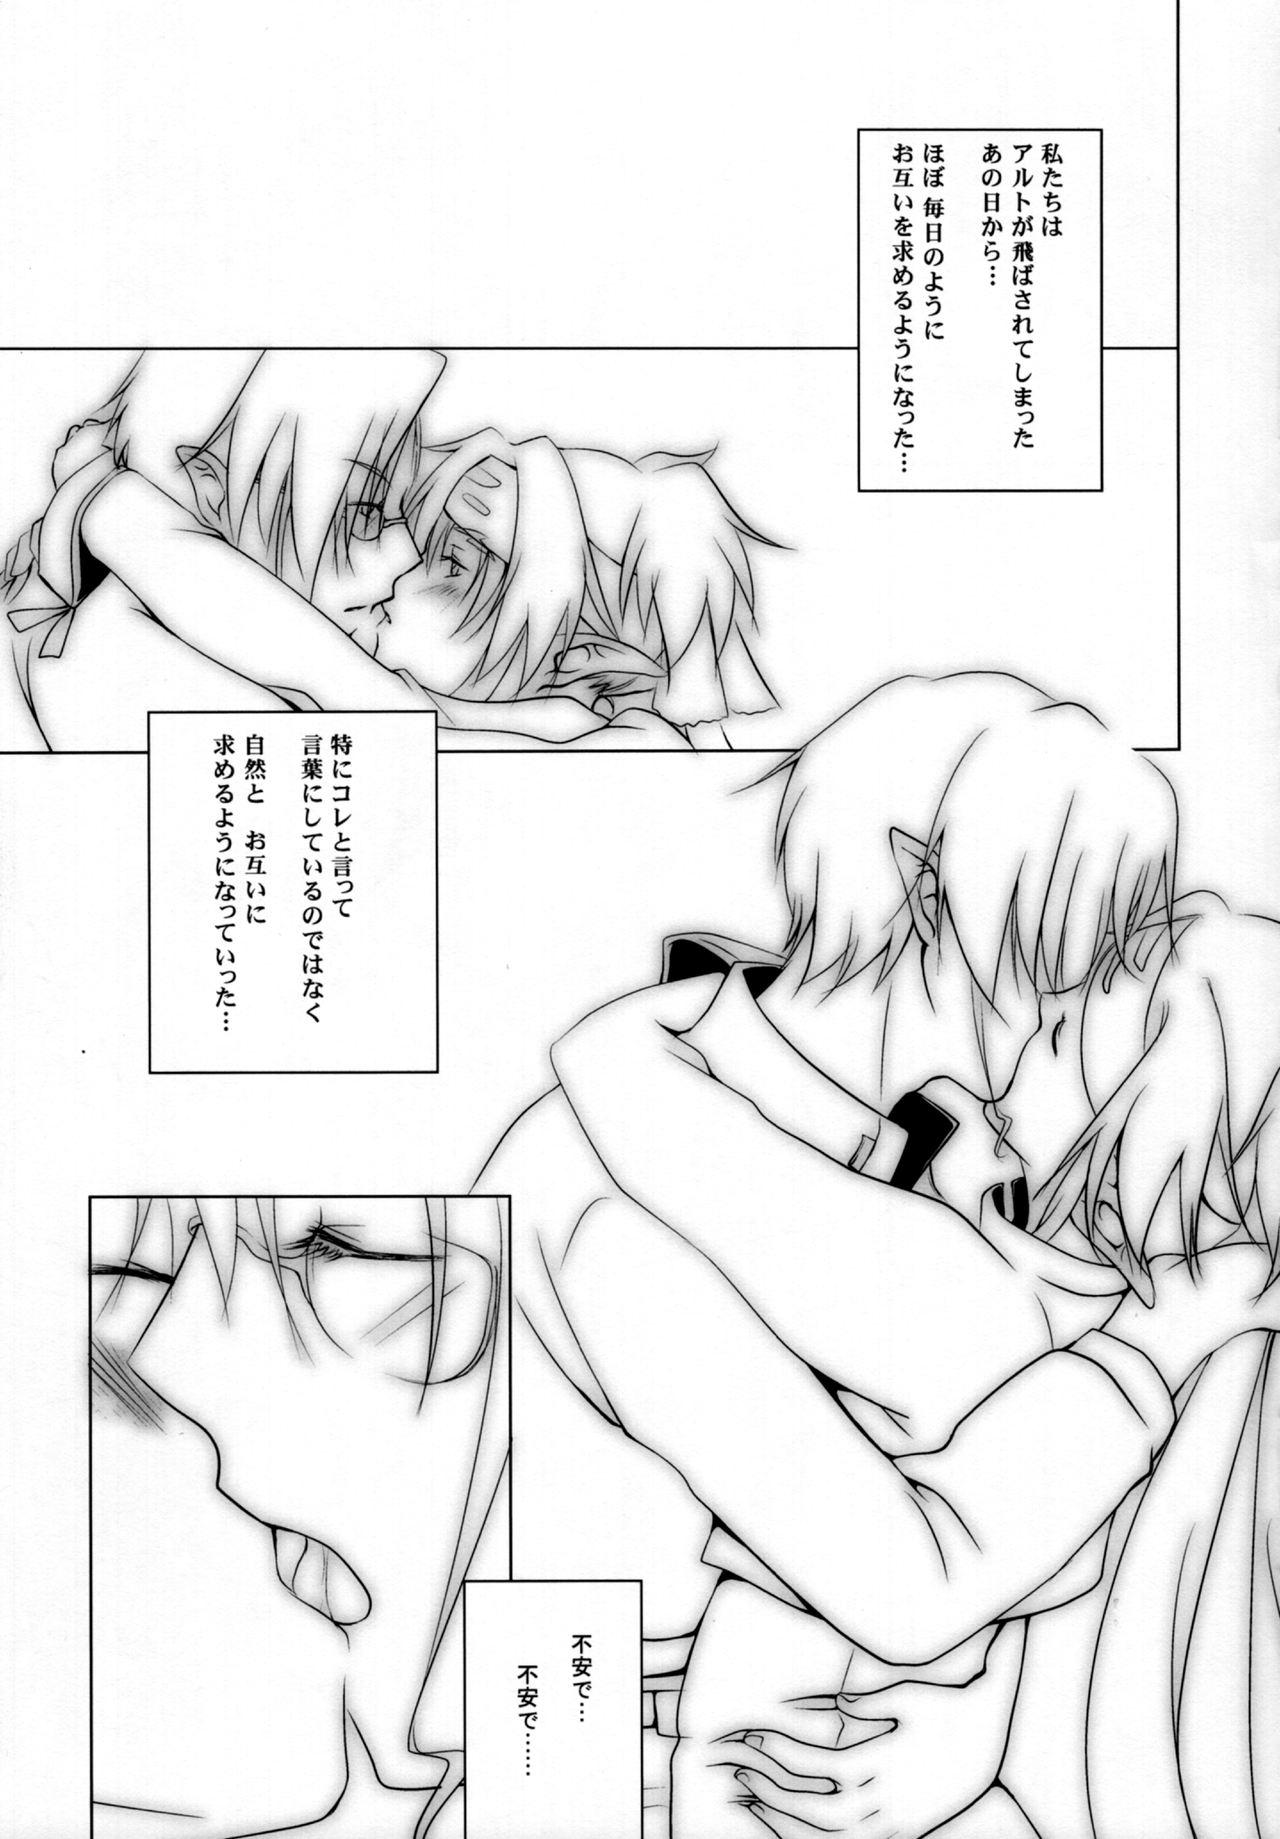 Pussysex Ever moment with you - Macross frontier Swing - Page 2